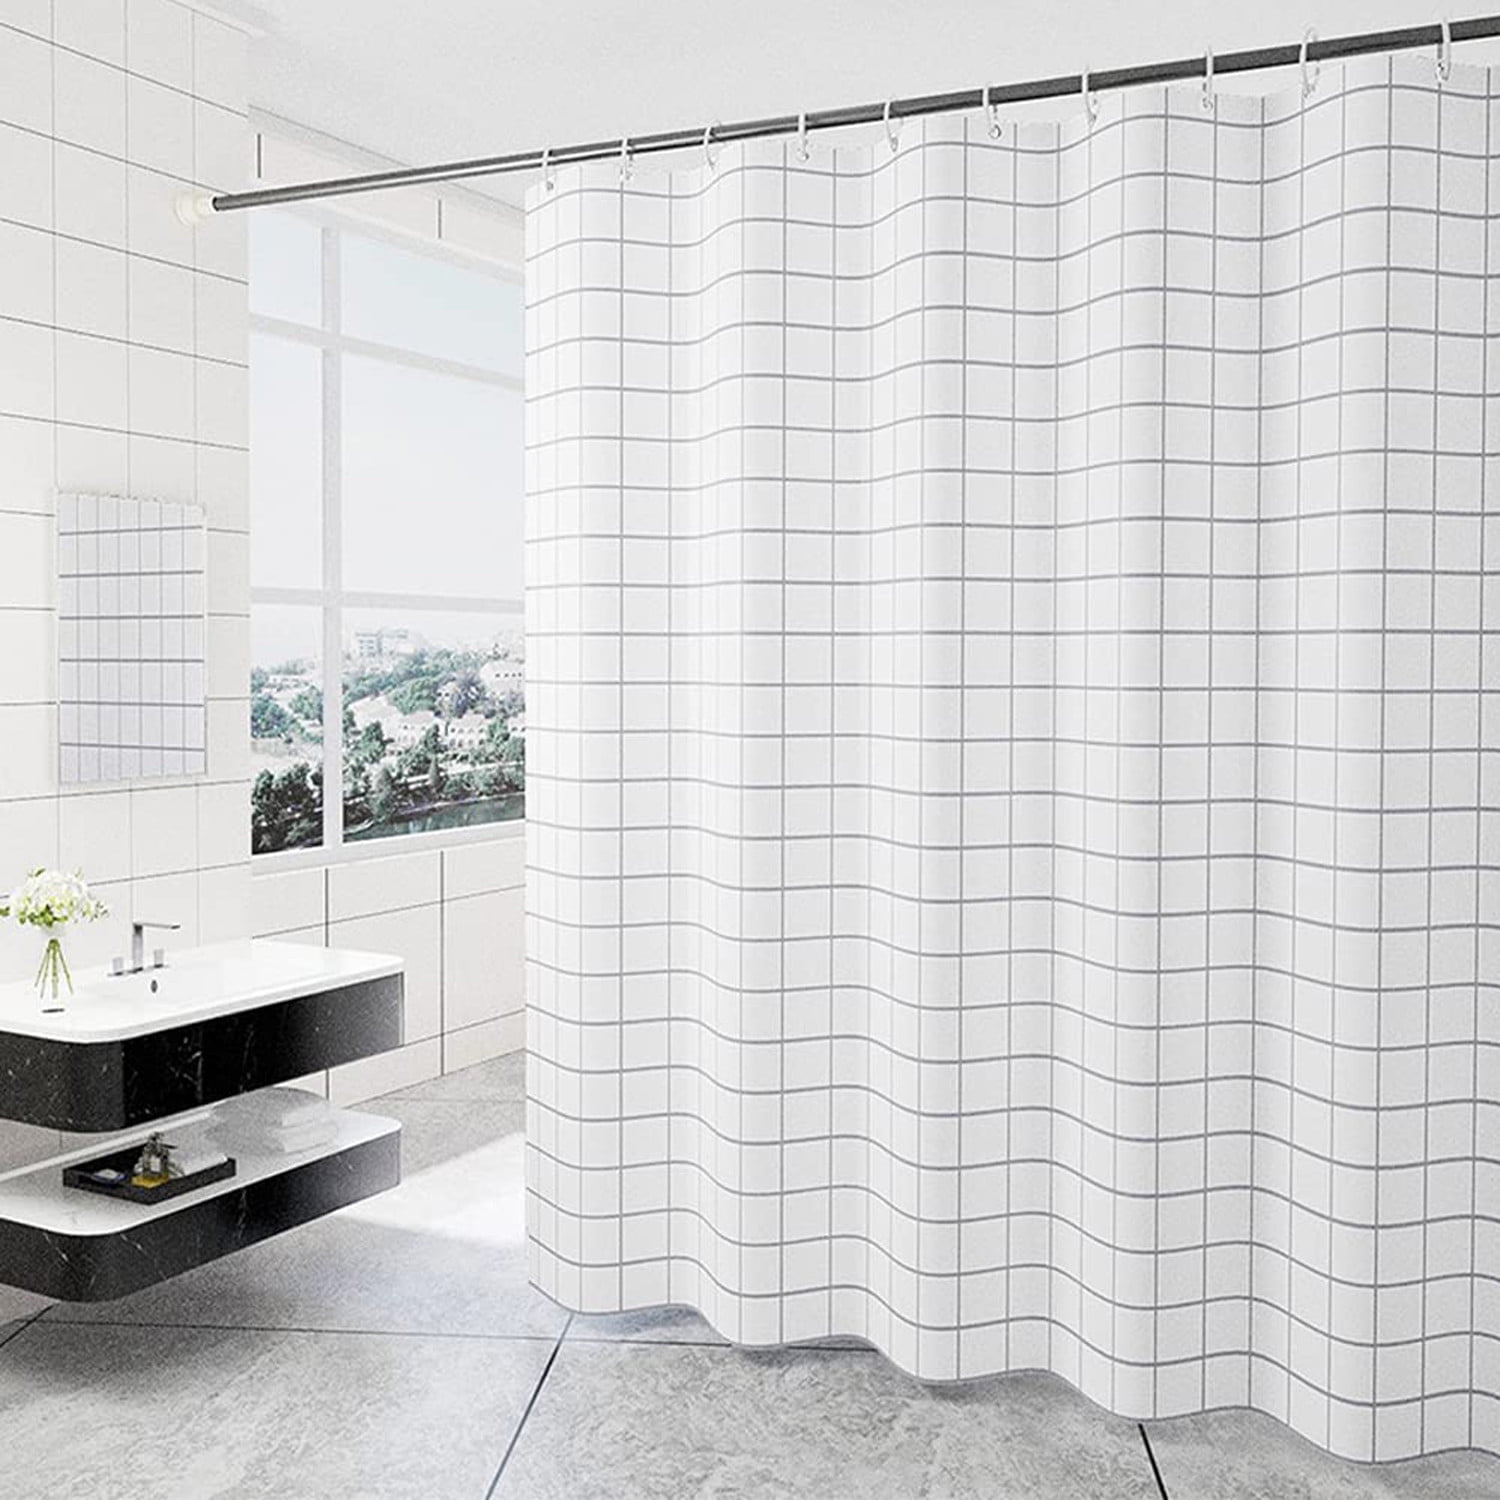 71 x 71 Inch Hankyky Shower Curtain Polyester Mould and Mildew Resistant Bathroom Curtain Liner Waterproof Hotel Quality With 12 Hooks 180 x 180 cm